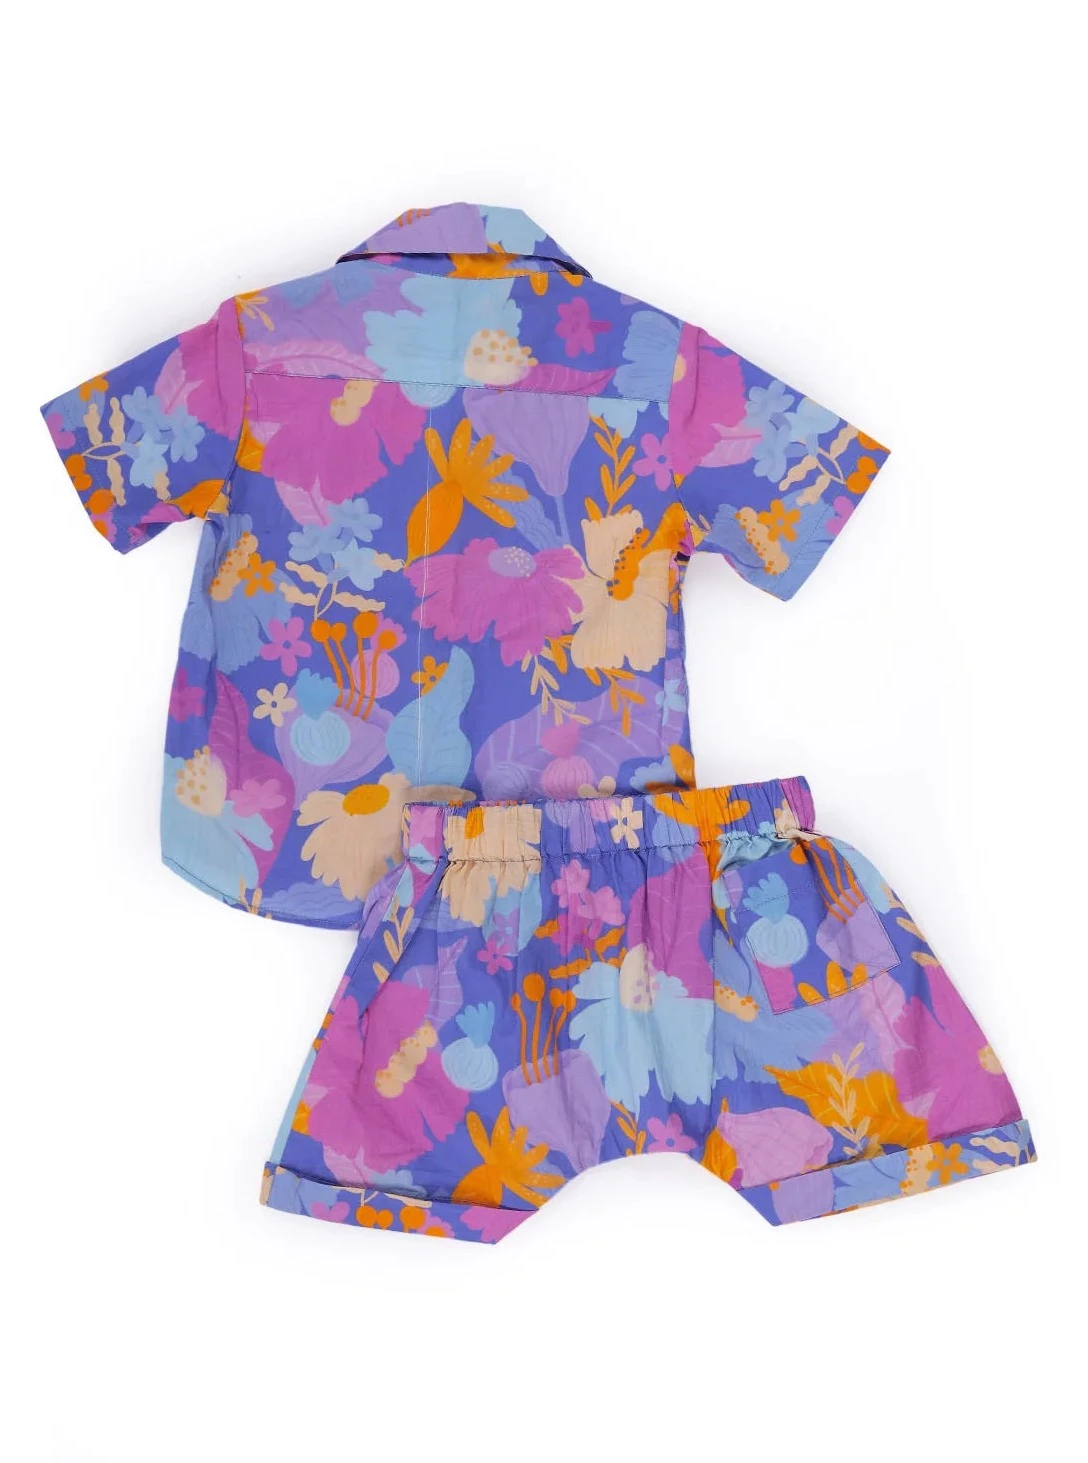 MIKO LOLO Daffy Infant Co-Ord Set in Organic Cotton | kids Fashion | The Green Collective SG